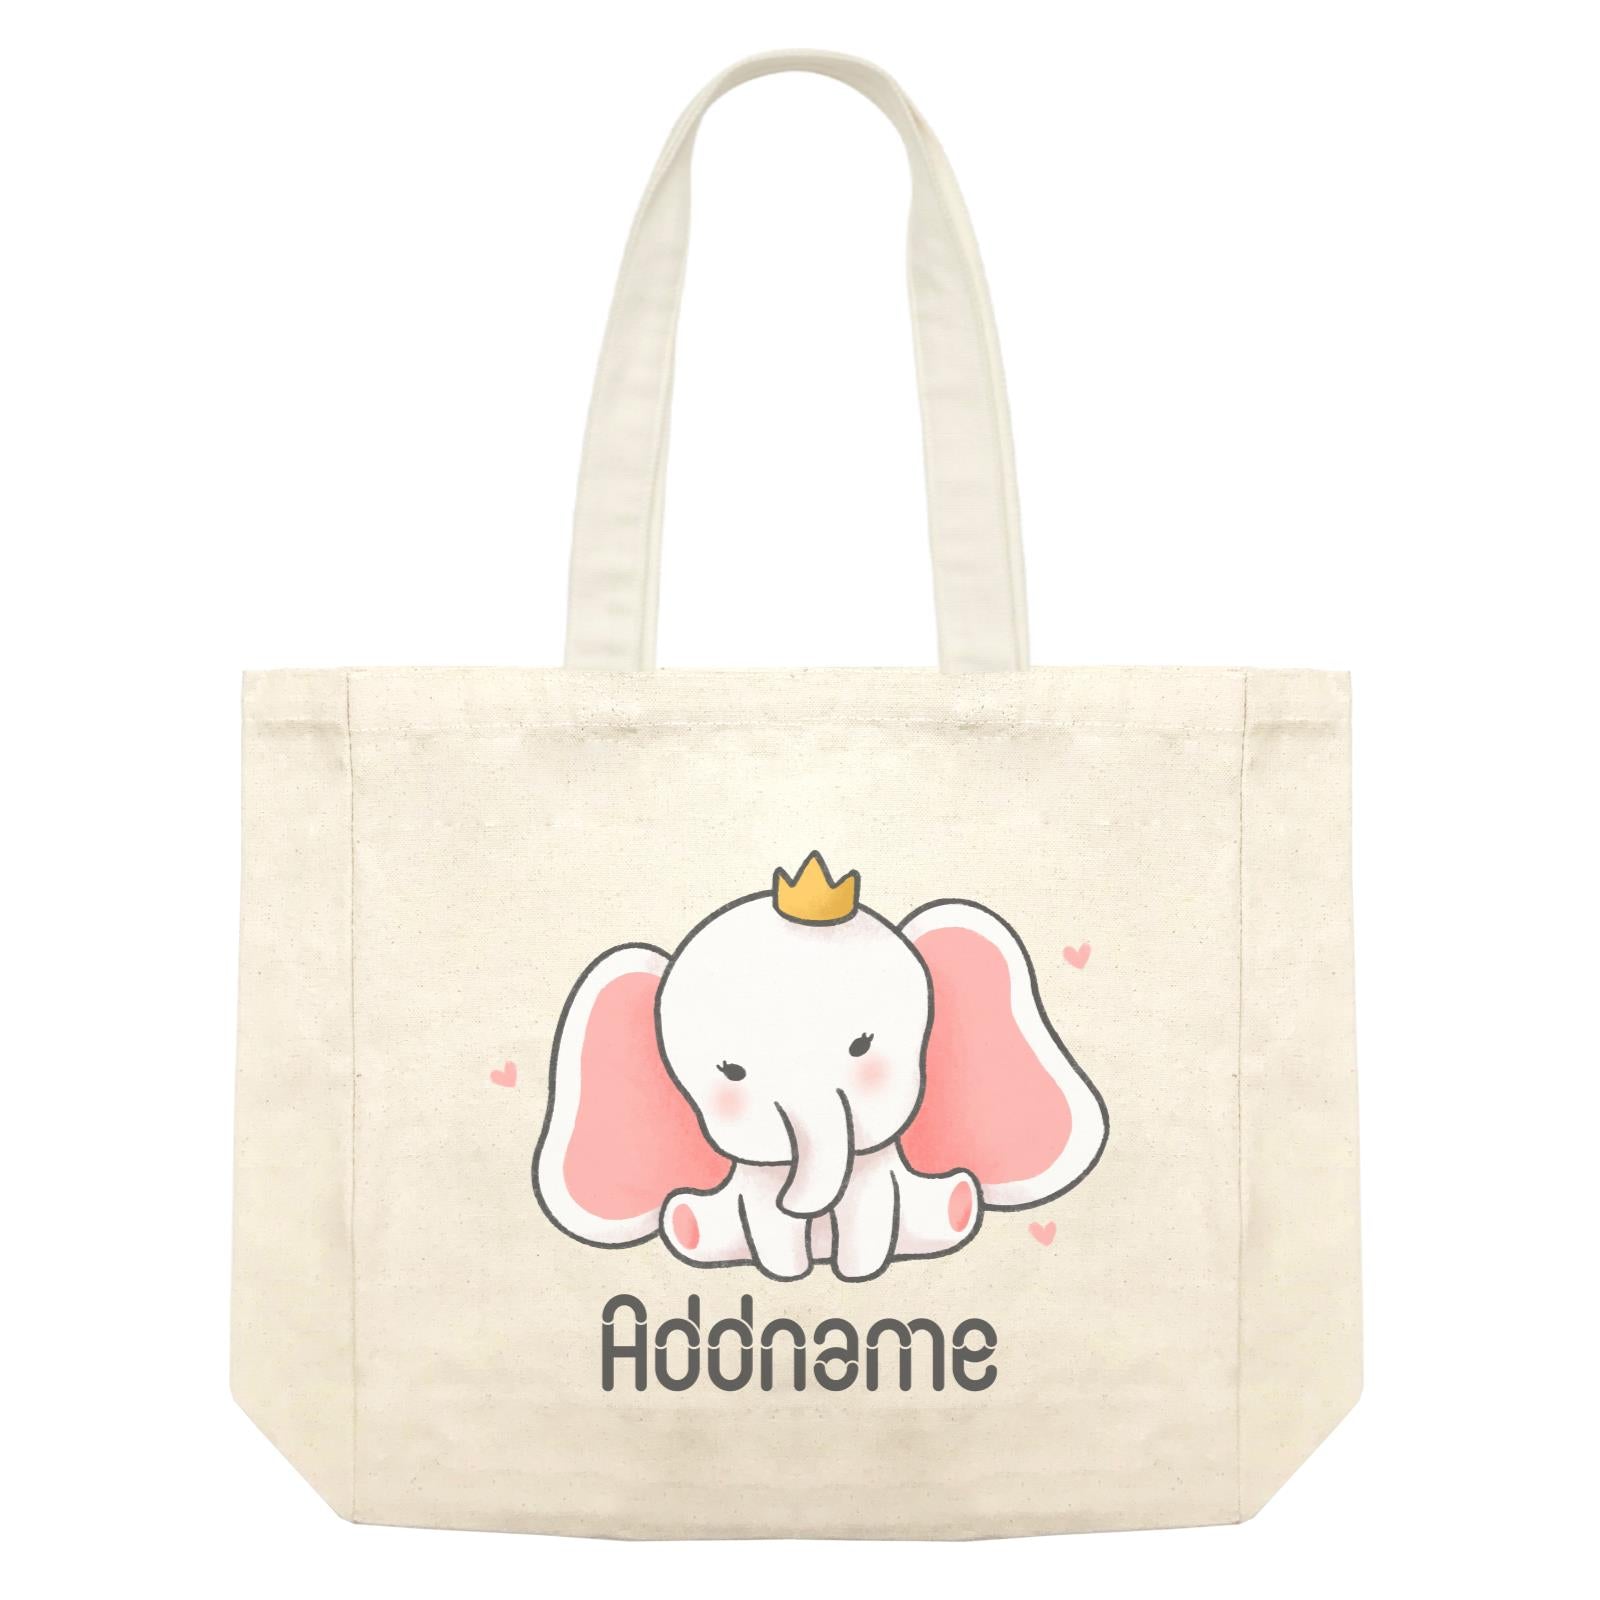 Cute Hand Drawn Style Baby Elephant with Crown Addname Shopping Bag